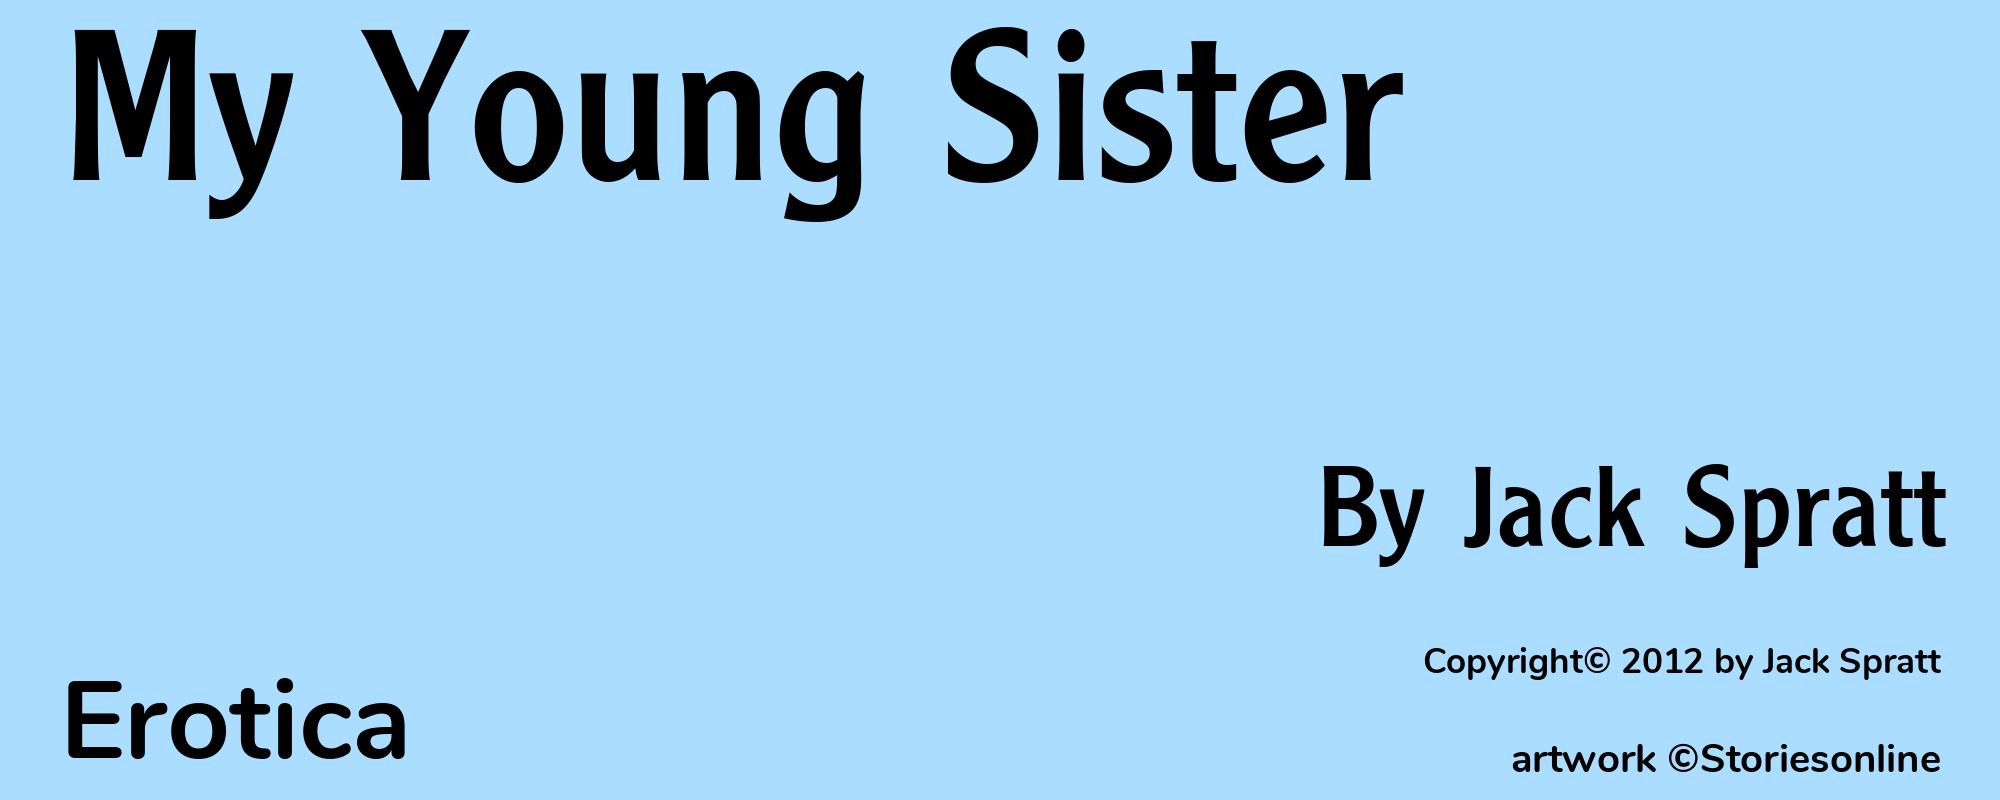 My Young Sister - Cover